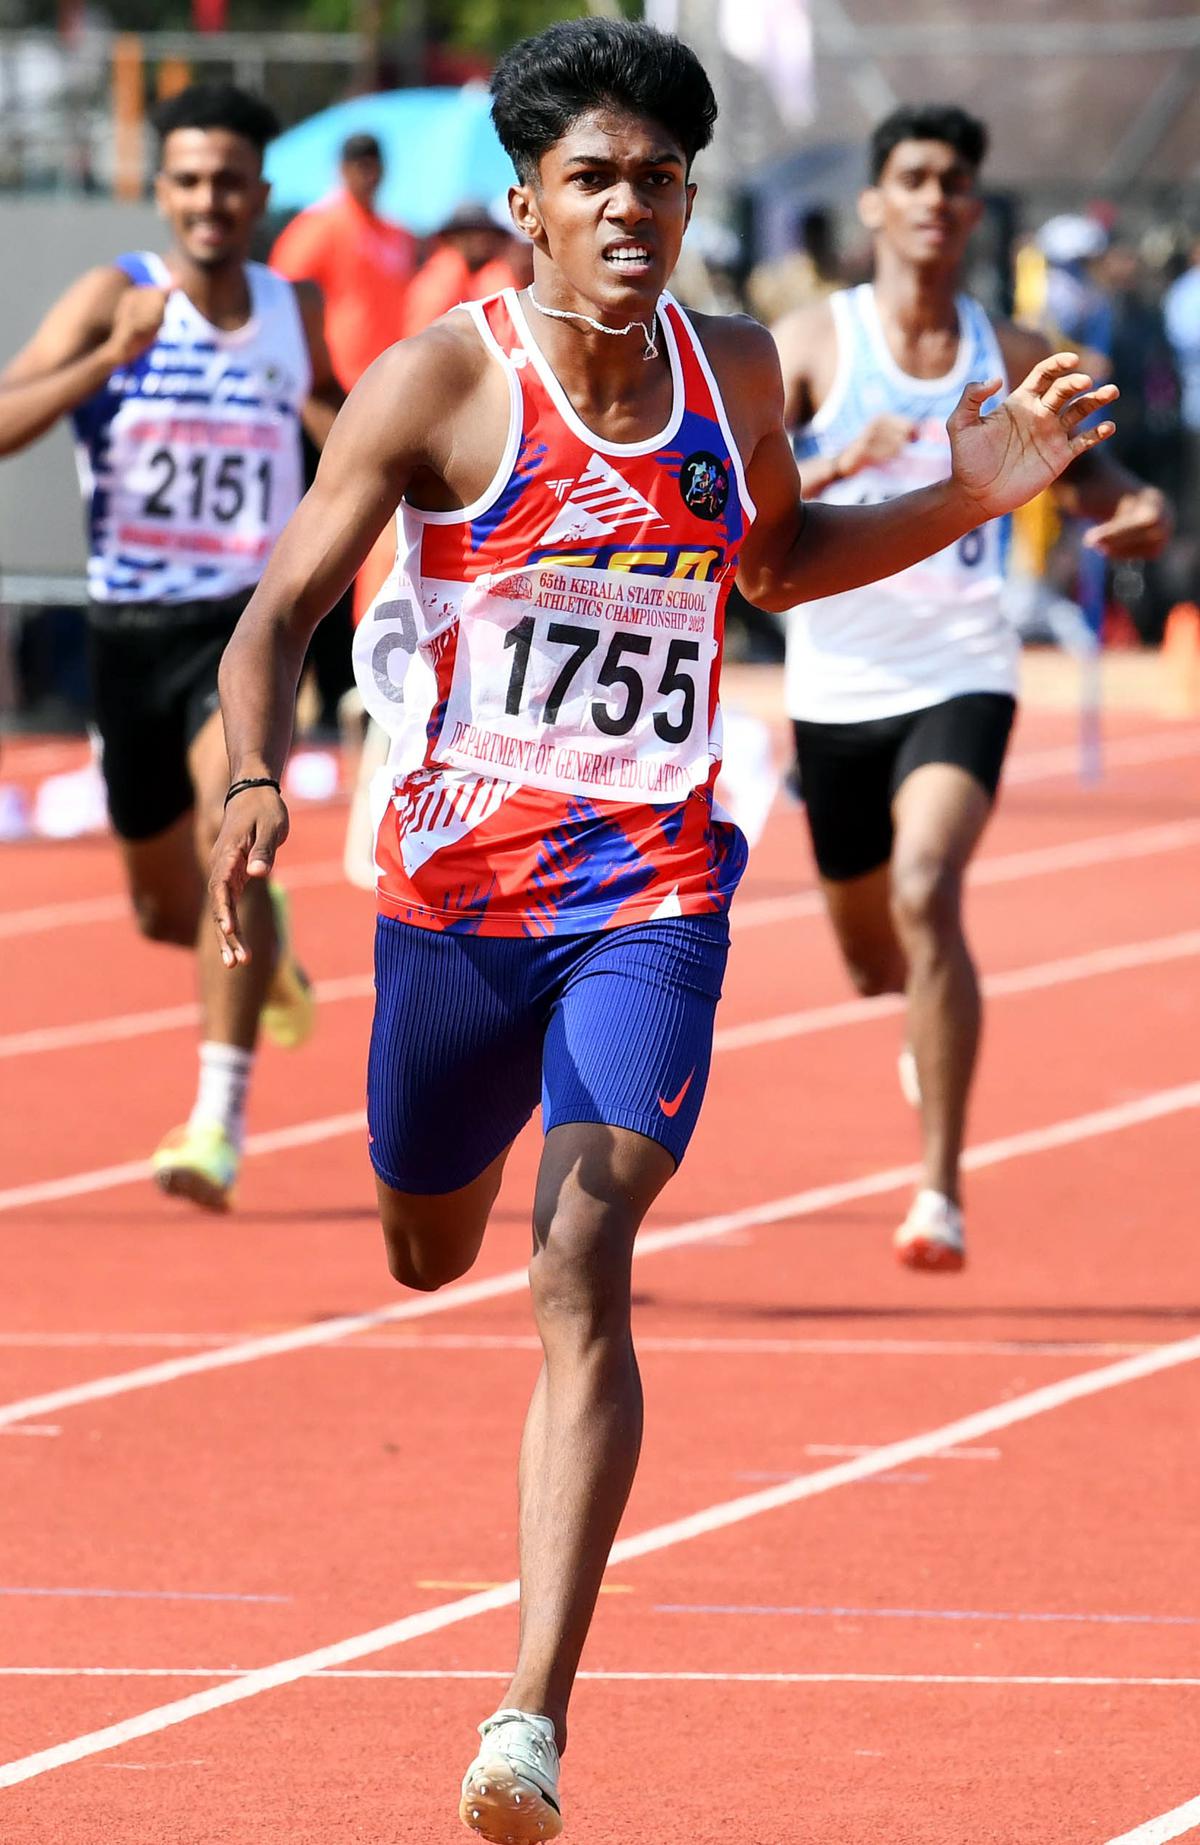 P. Abiram who broke the 18-year-old meet record in the senior boys 400m at the 65th Kerala State schools athletics championships in Kunnamkulam on Tuesday.